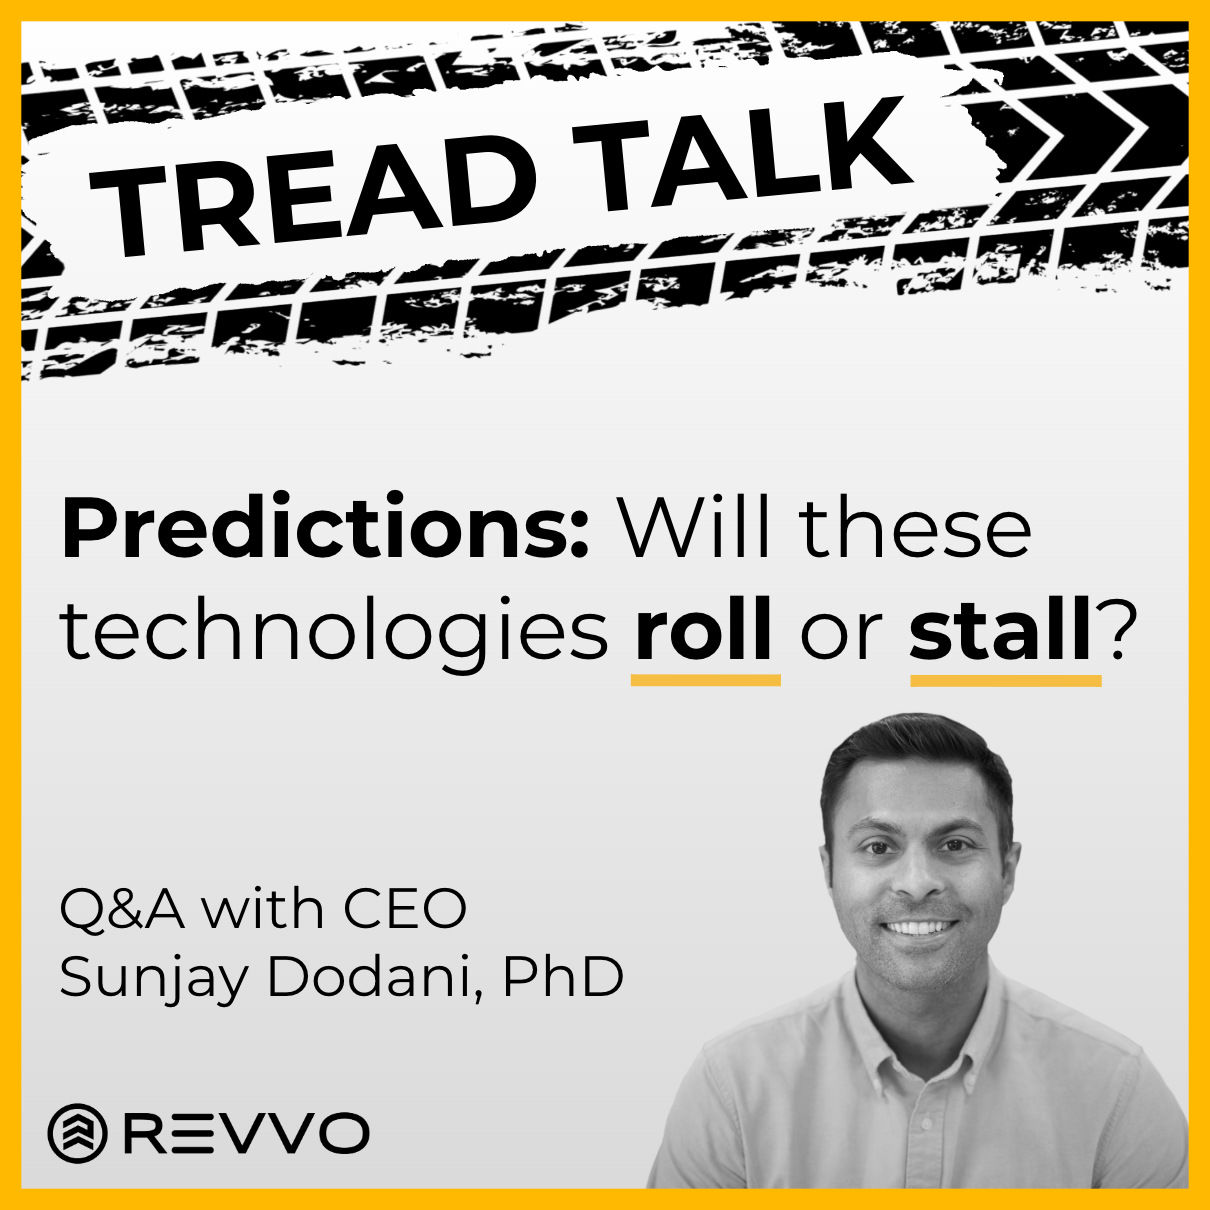 Promotional graphic for technology predictions Q&A event.